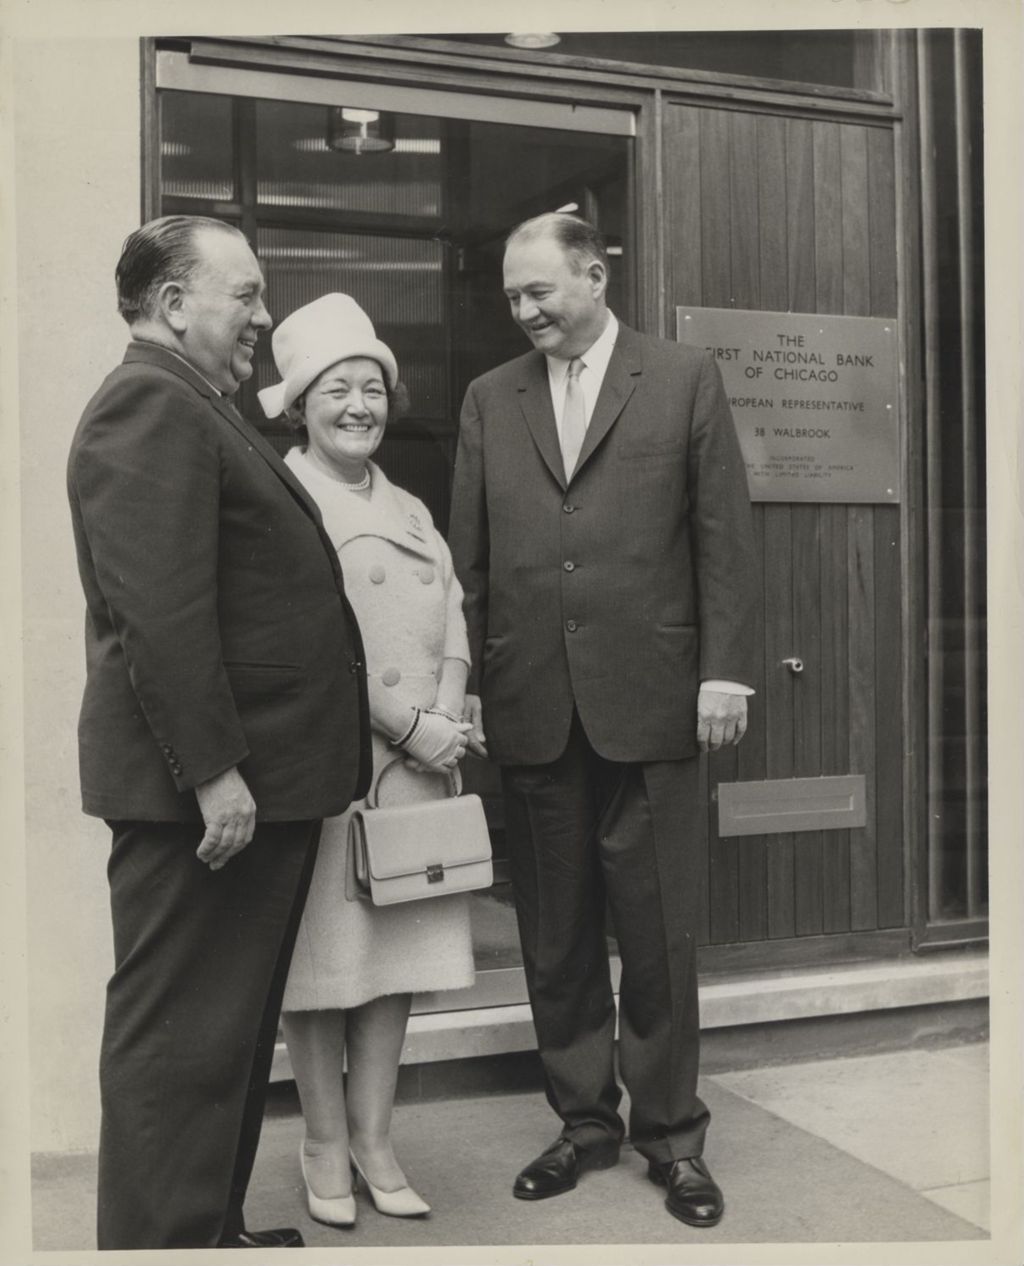 Eleanor and Richard J. Daley with a representative of the First National Bank of Chicago in London